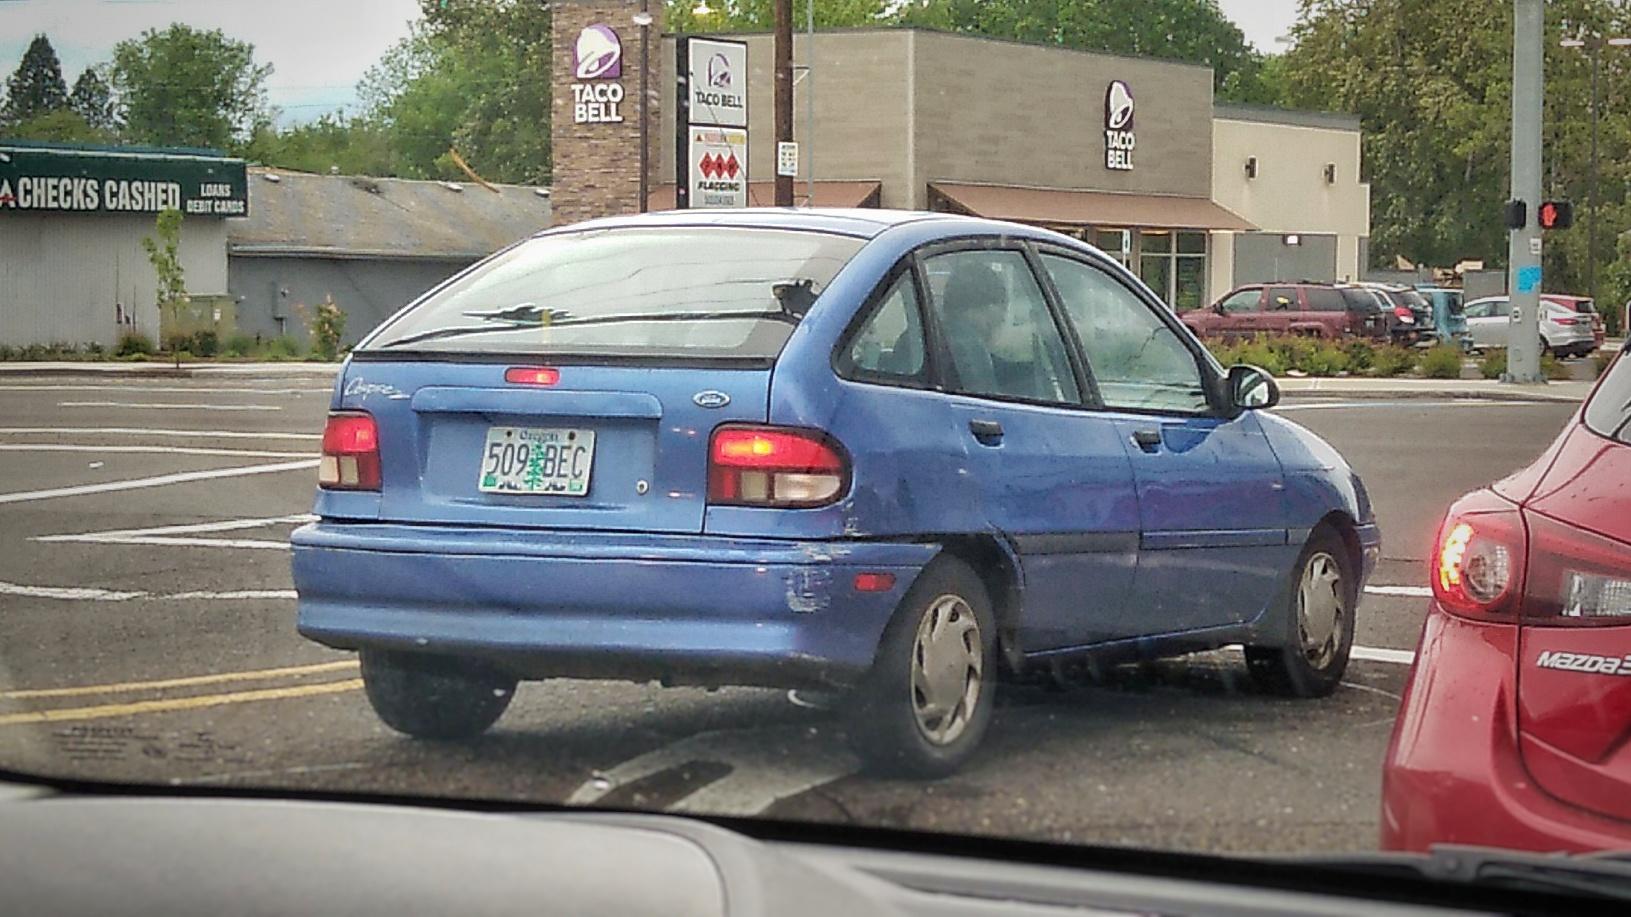 1990s Ford Aspire: The Official Car Of...? (Real Photo) :  r/regularcarreviews